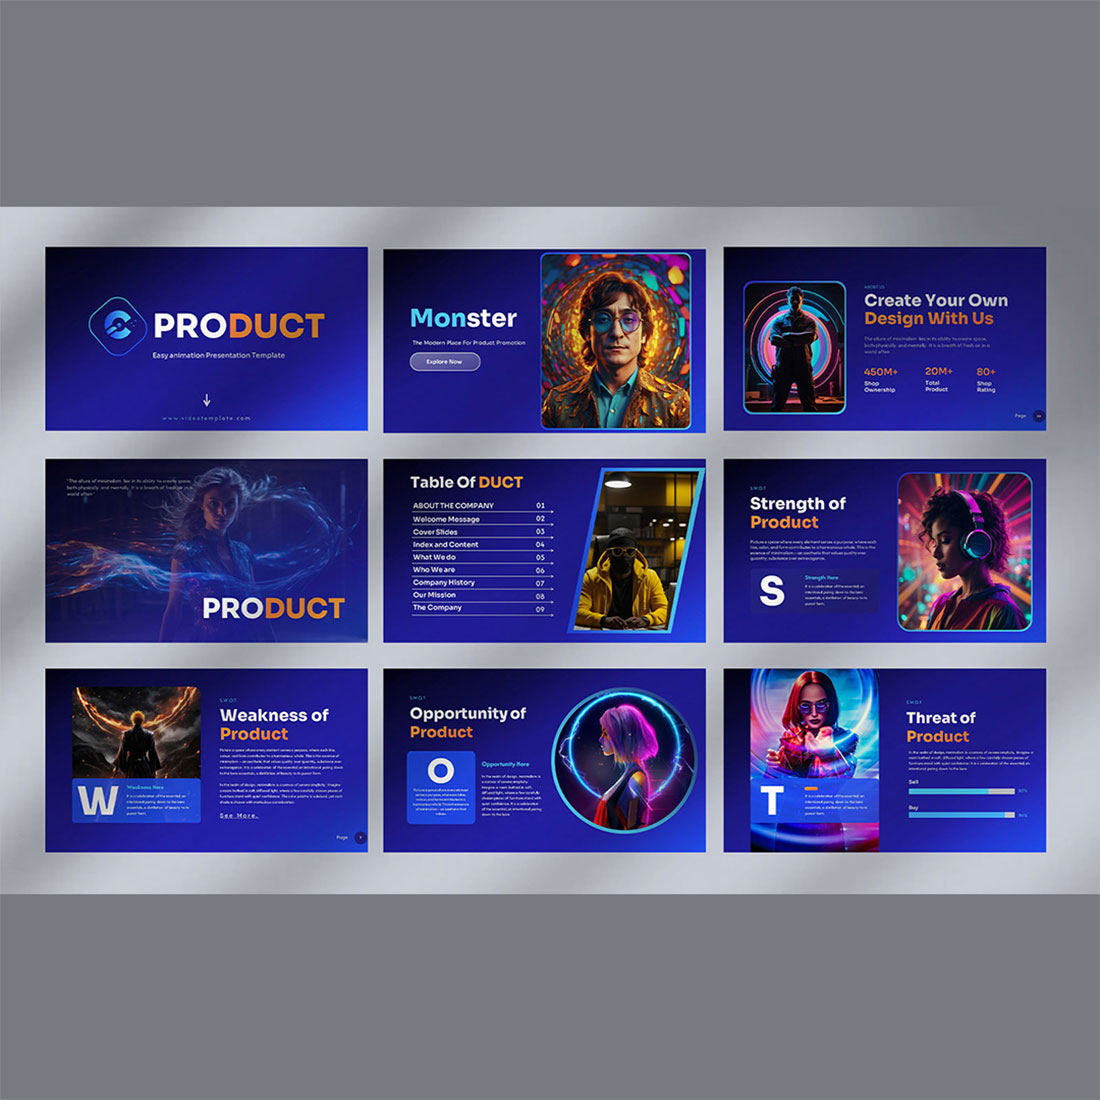 Product Monster PowerPoint Presentation Template preview image.